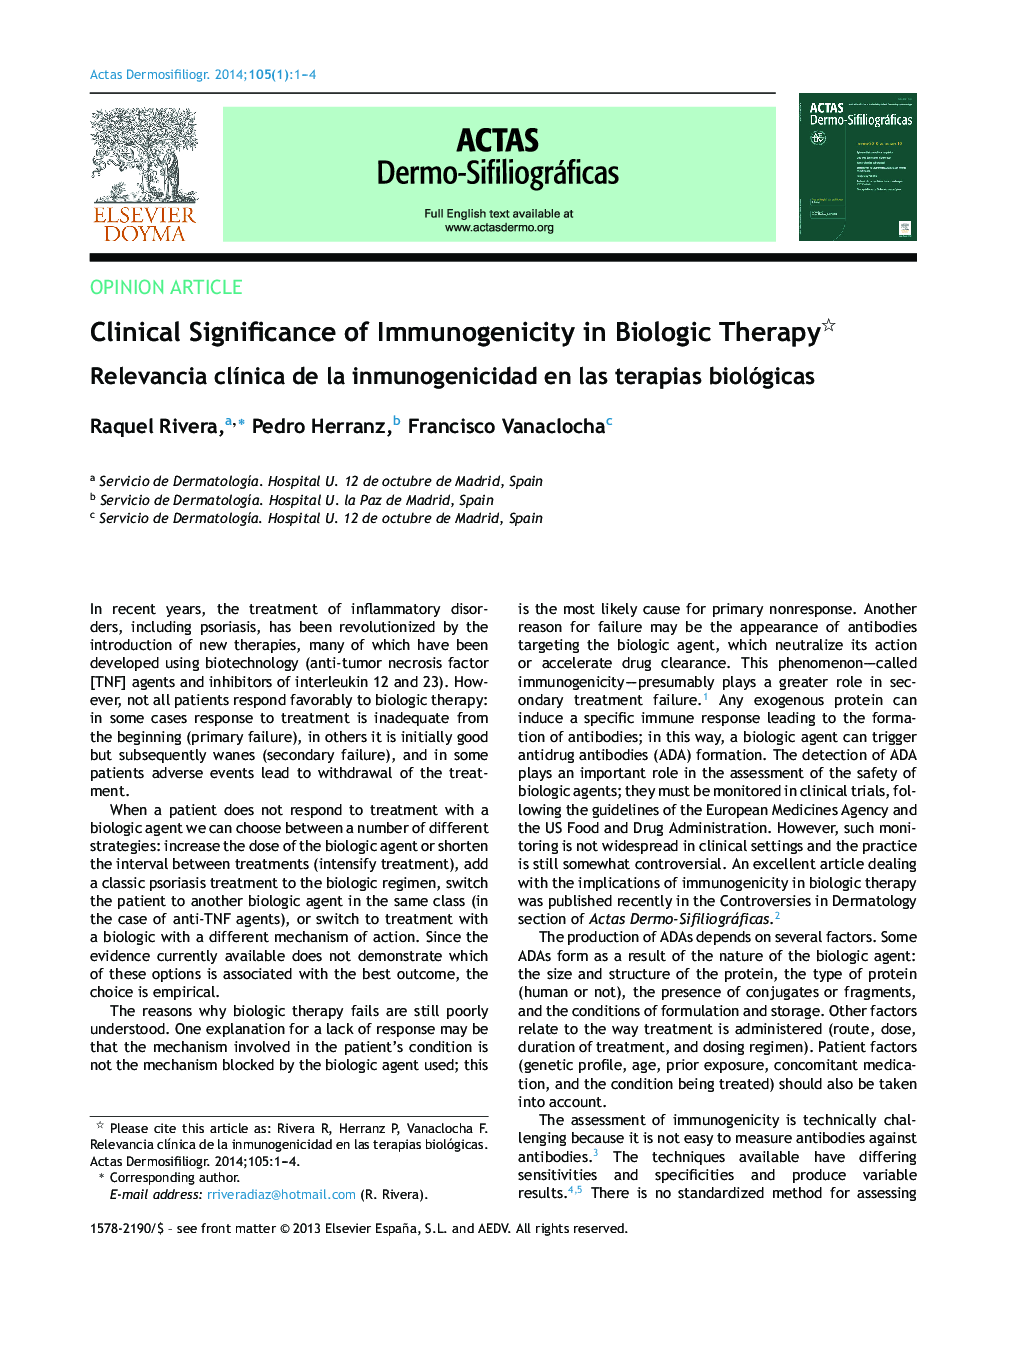 Clinical Significance of Immunogenicity in Biologic Therapy